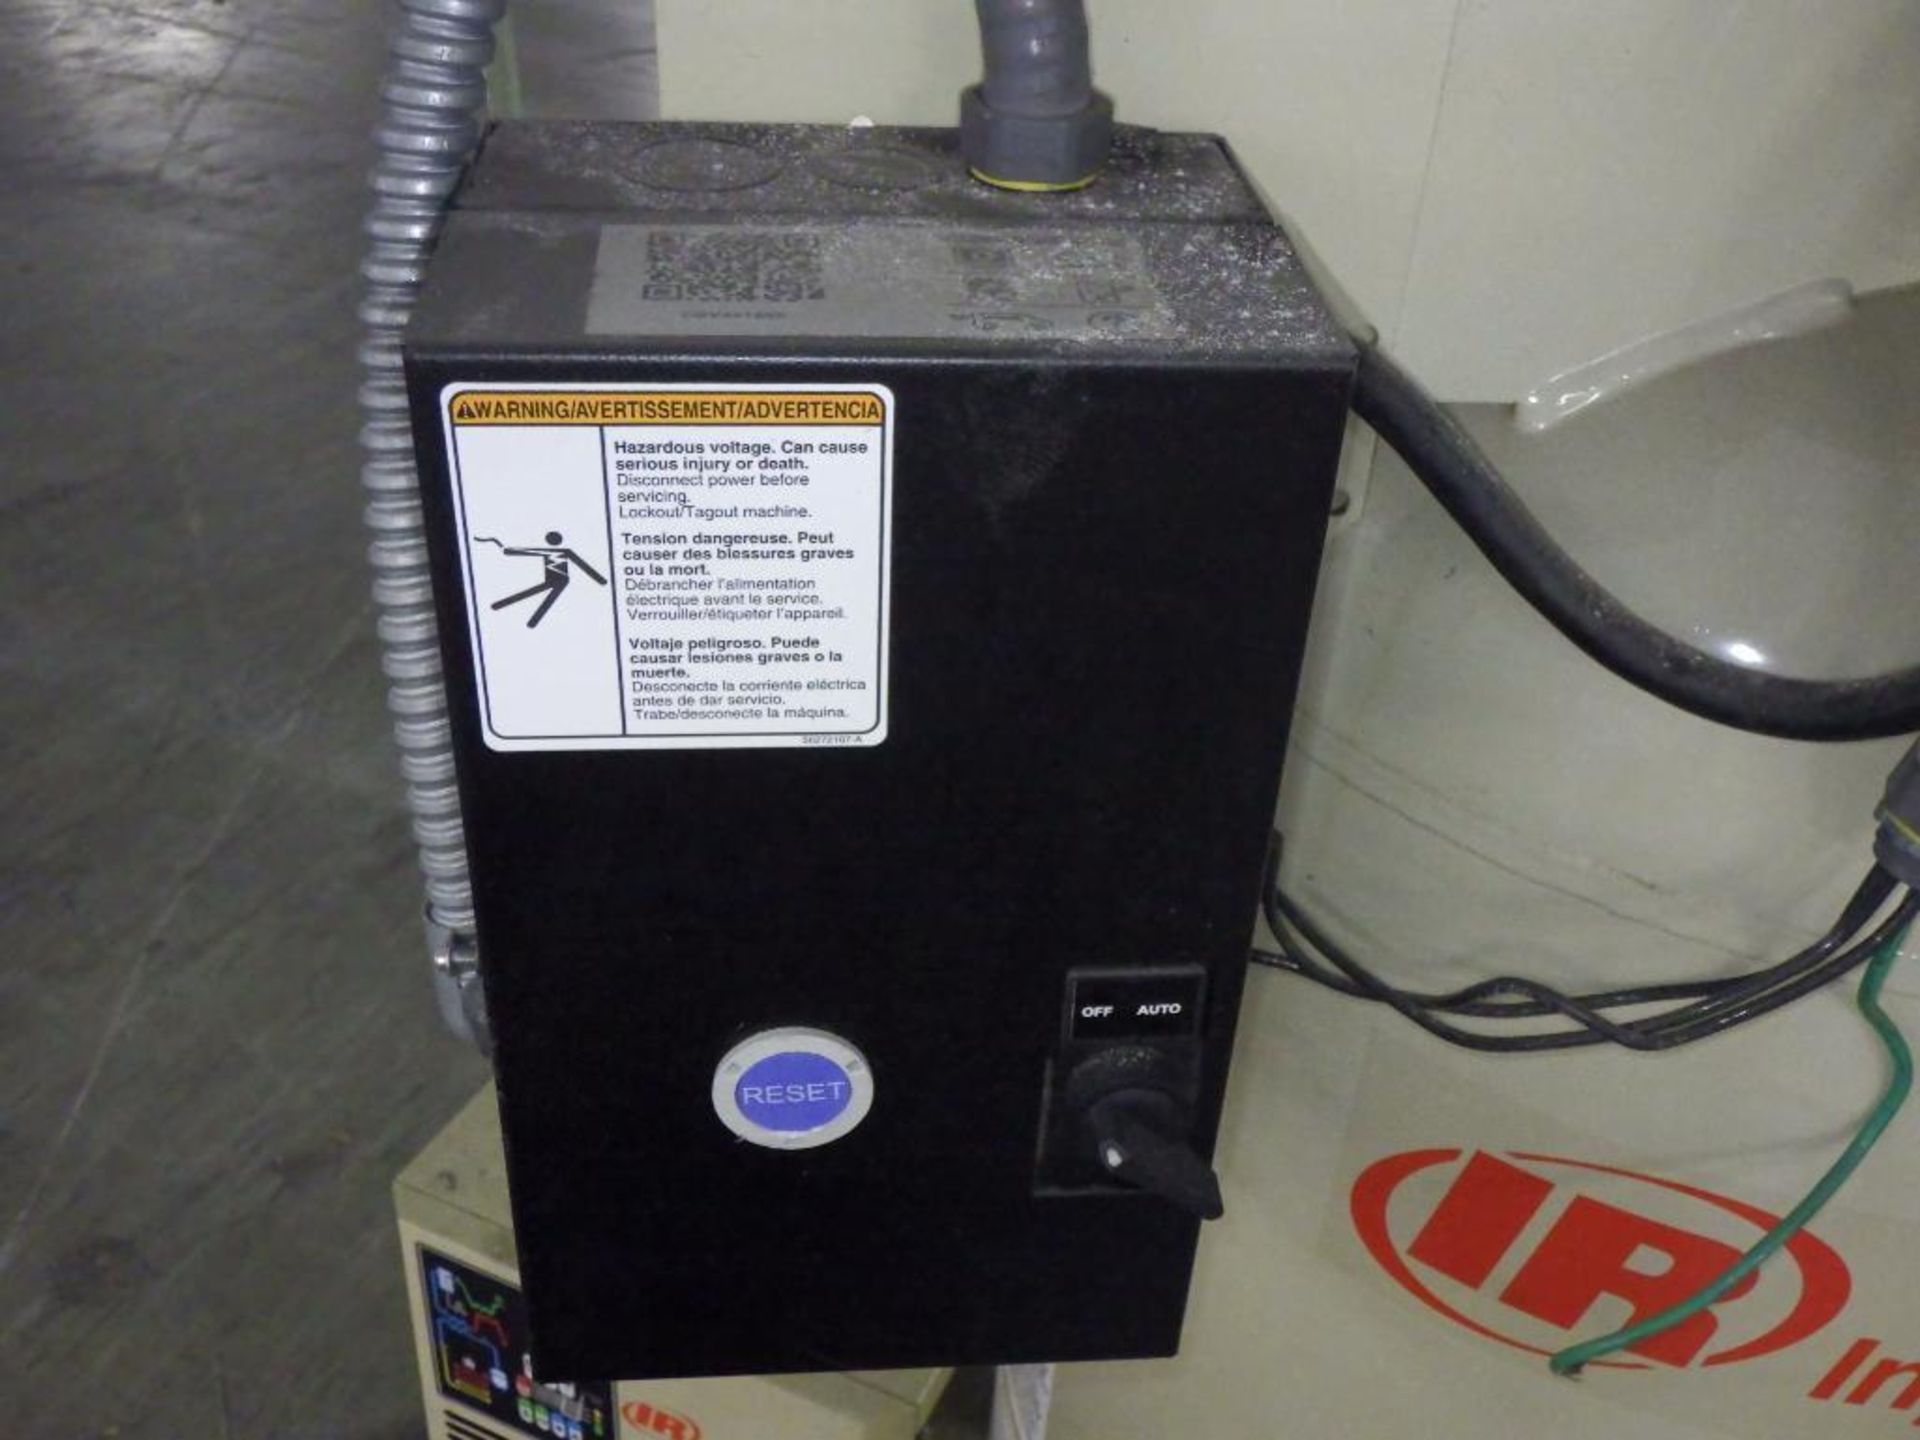 Ingersoll rand air compressor with dryer - Image 7 of 12